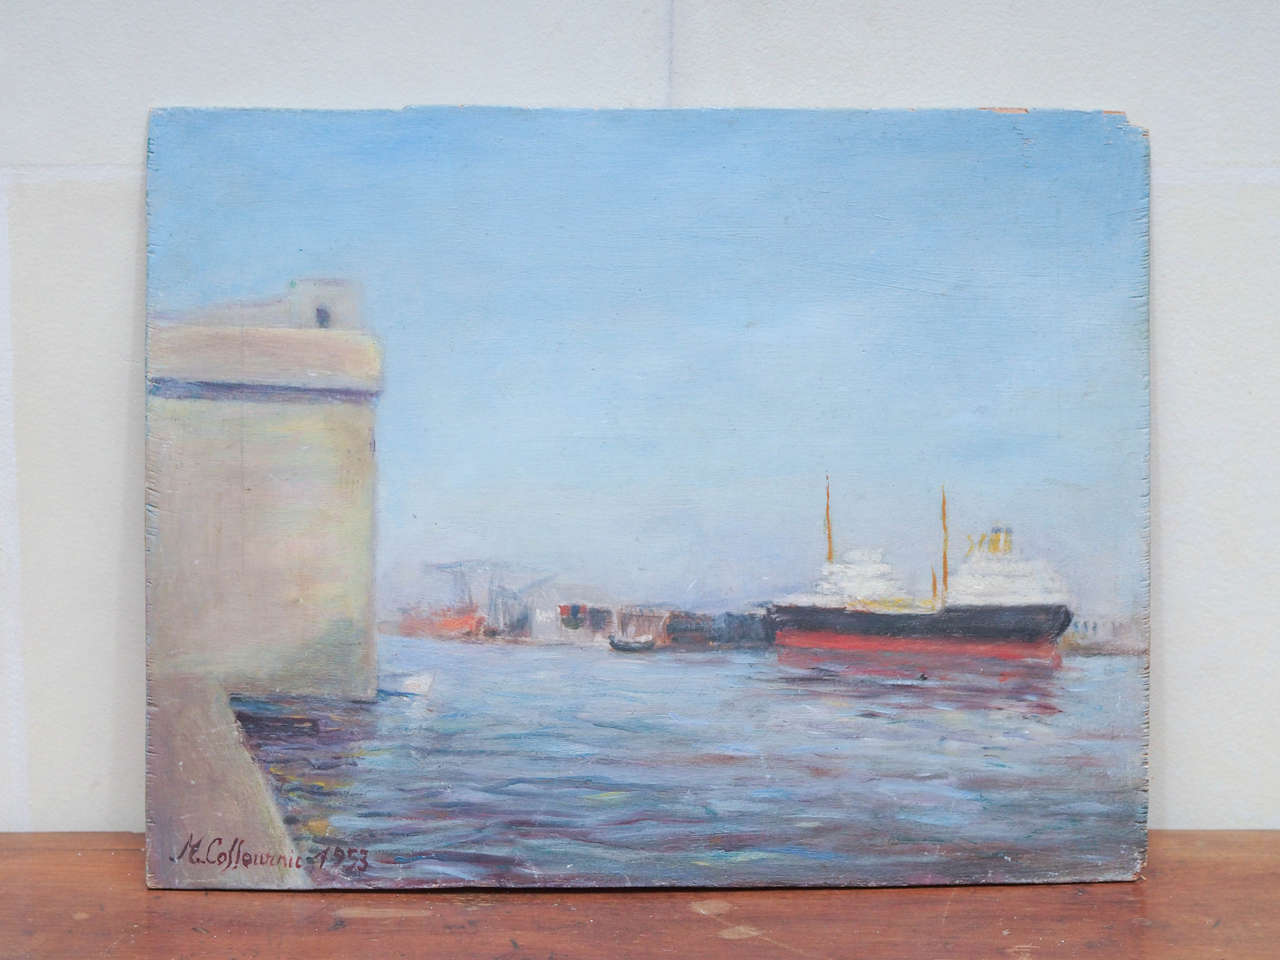 Signed on the reverse M. Colloivinic Dec '53, this oil on board painting is of Saint-Nazaire. Saint-Nazaire is a Community on the Loire-Atlantic department in western France, in traditional Brittany. The town has a major harbor on the right bank of